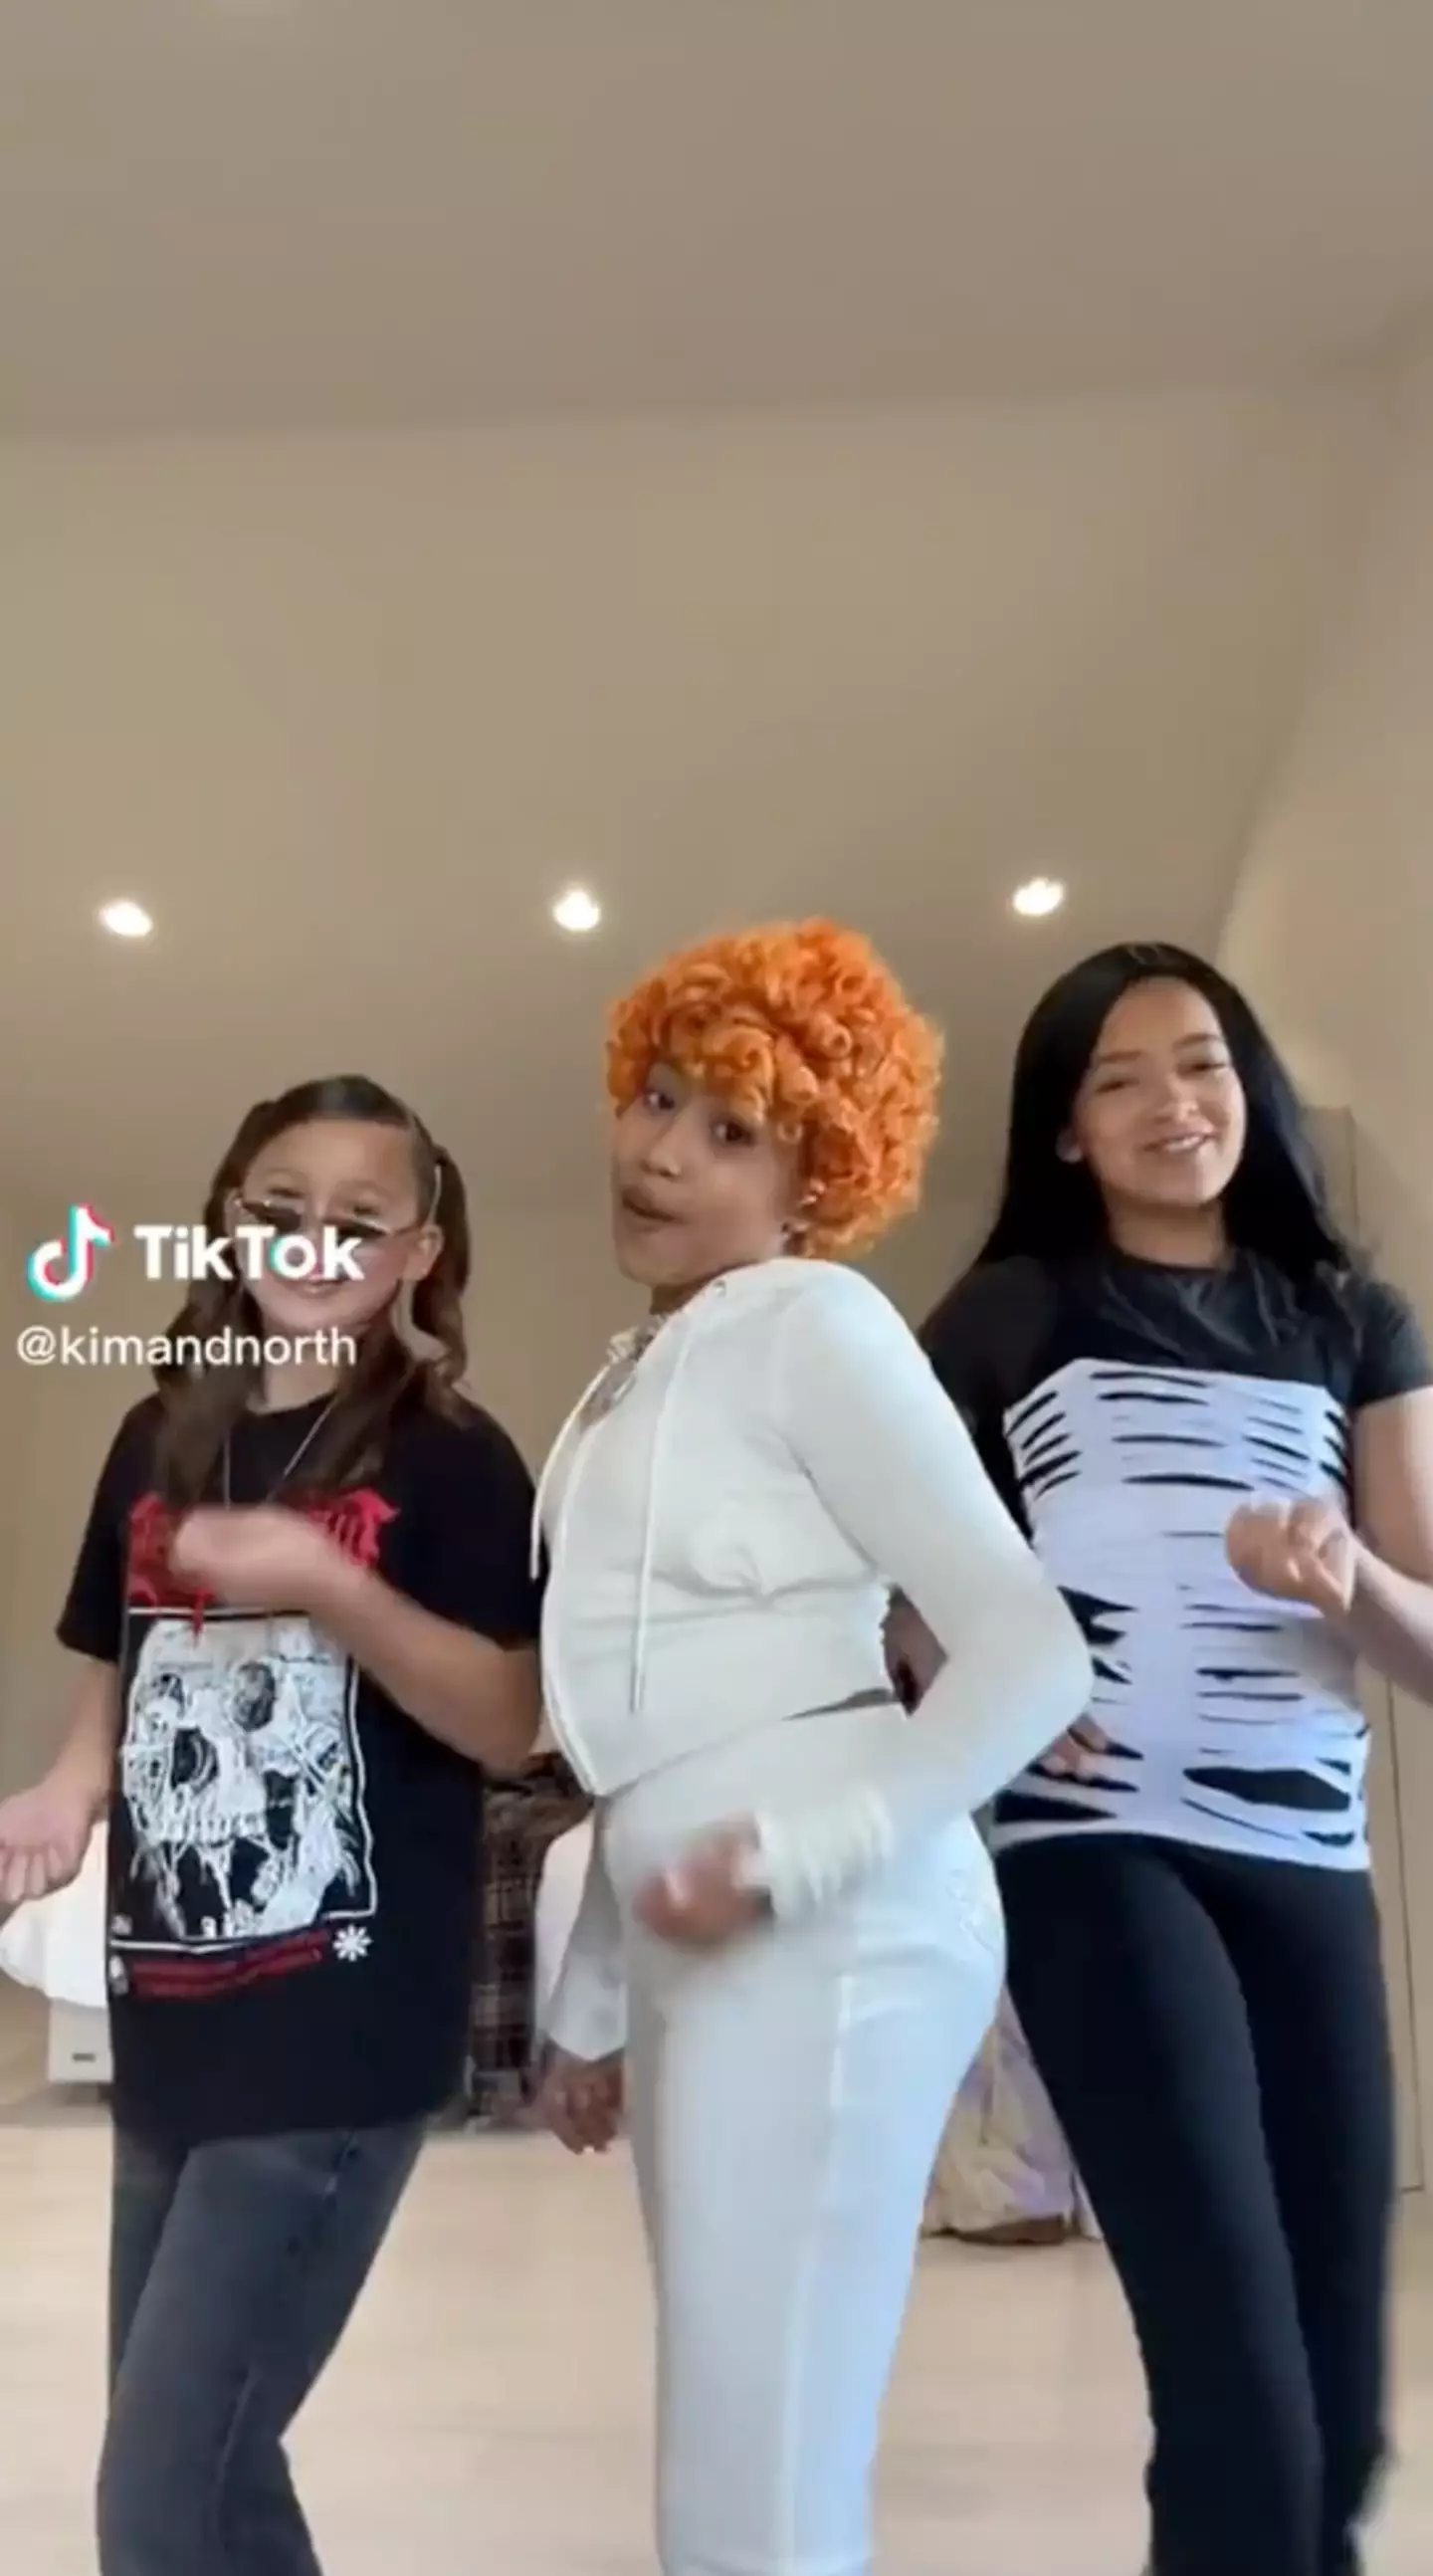 Kardashian fans have leaped to the defence of a new TikTok showing North West dancing with her friends to 'in ha mood' by Ice Spice.